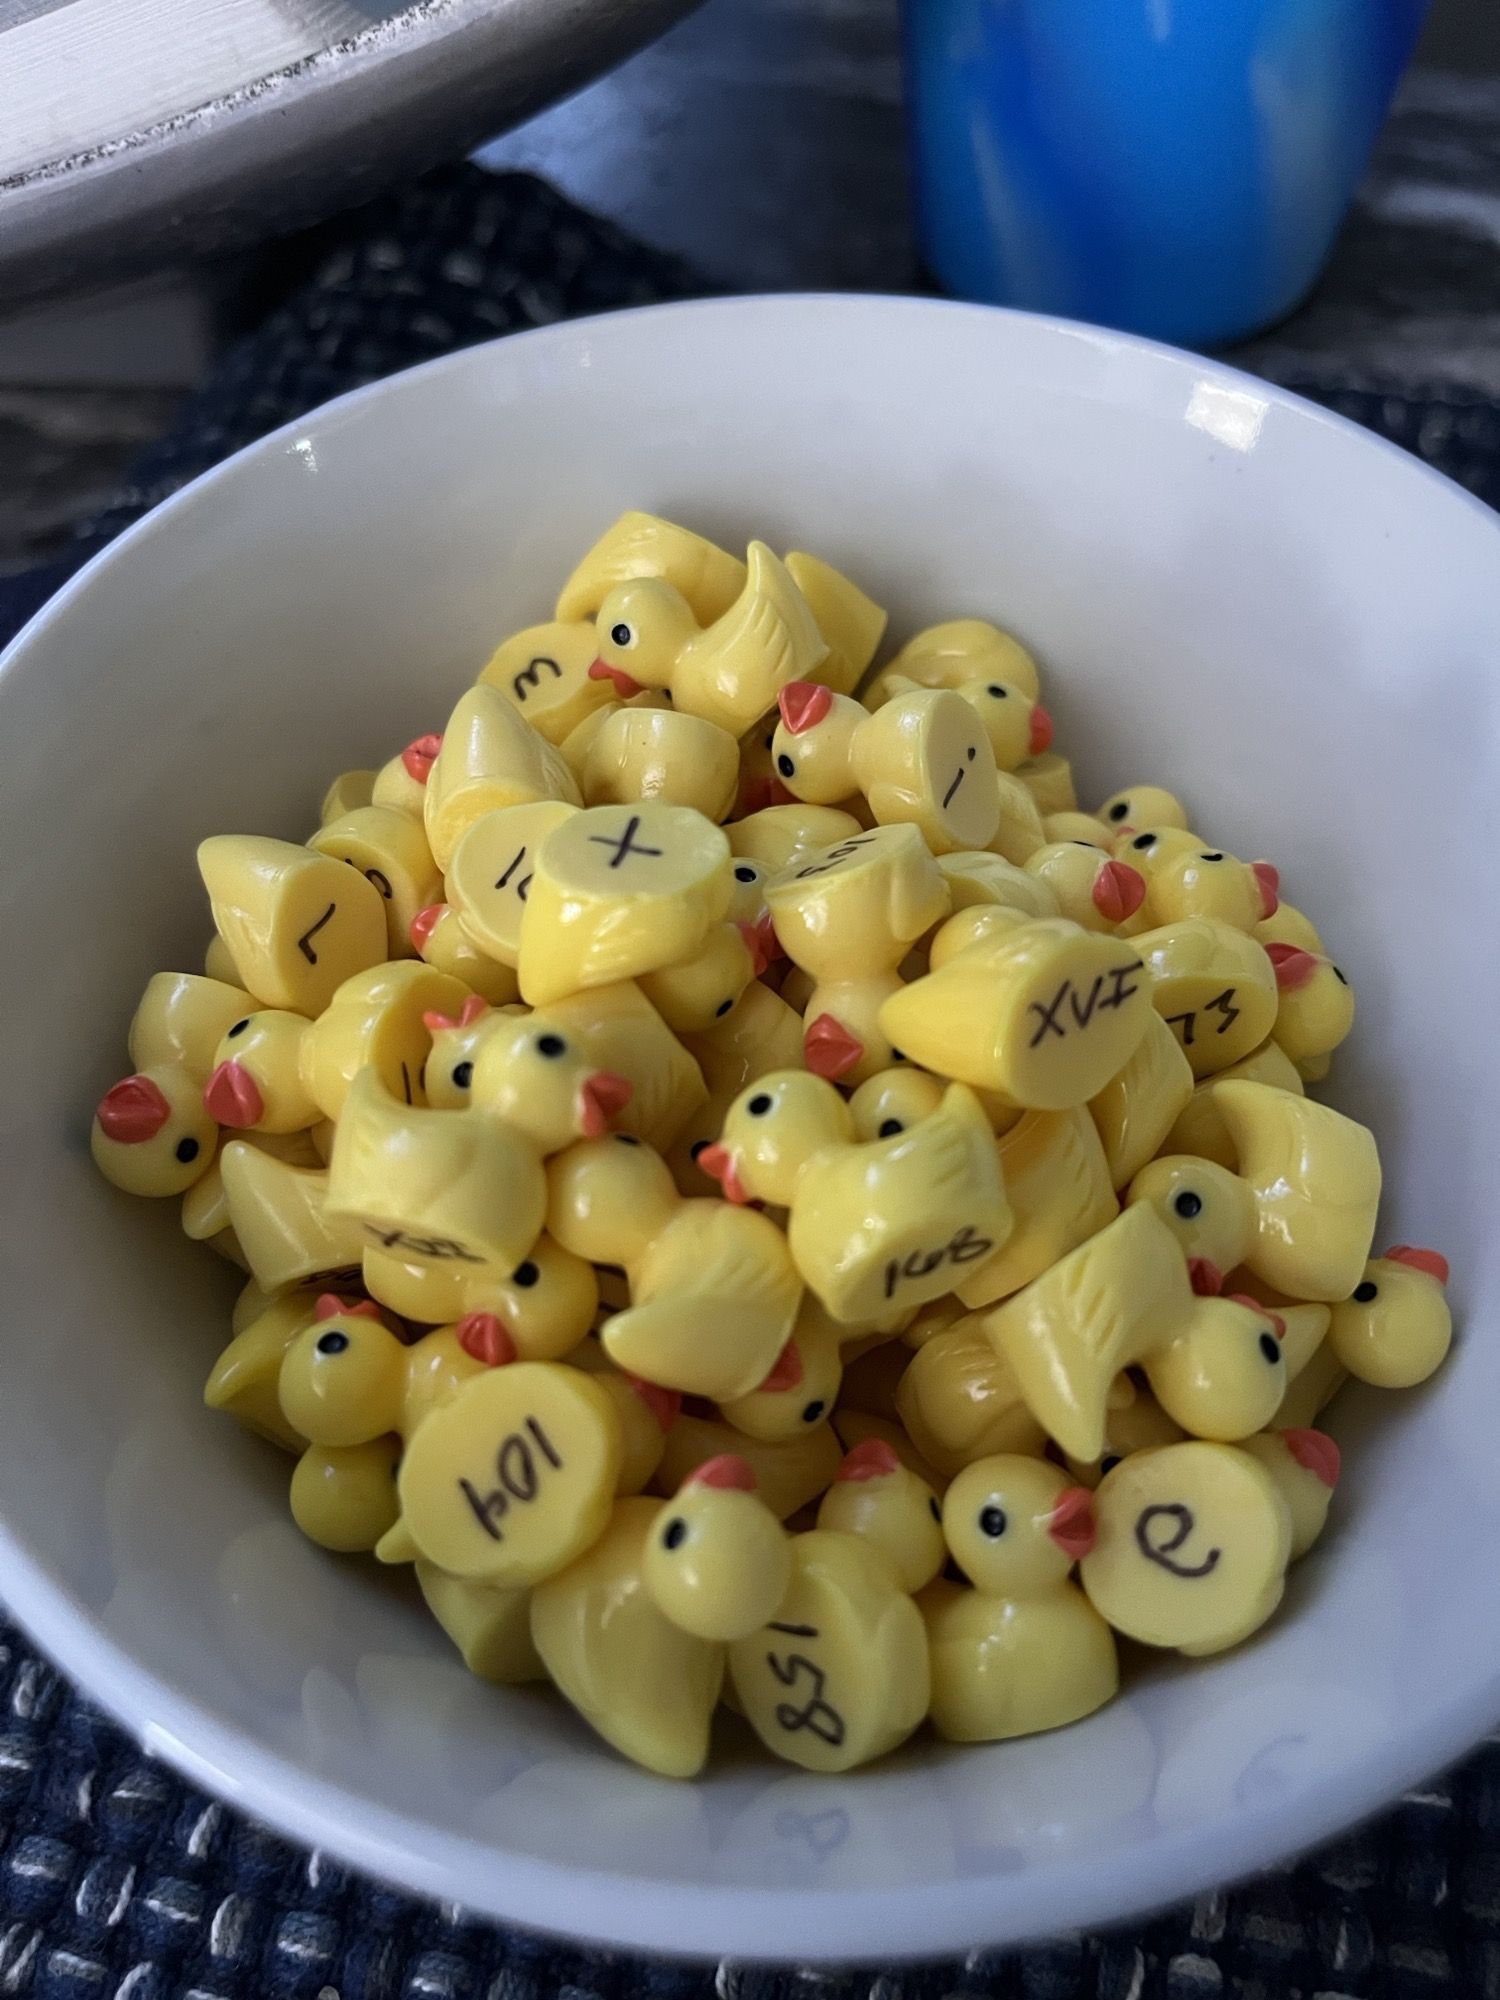 Number and lettering tiny ducks to hide in my friends homes.